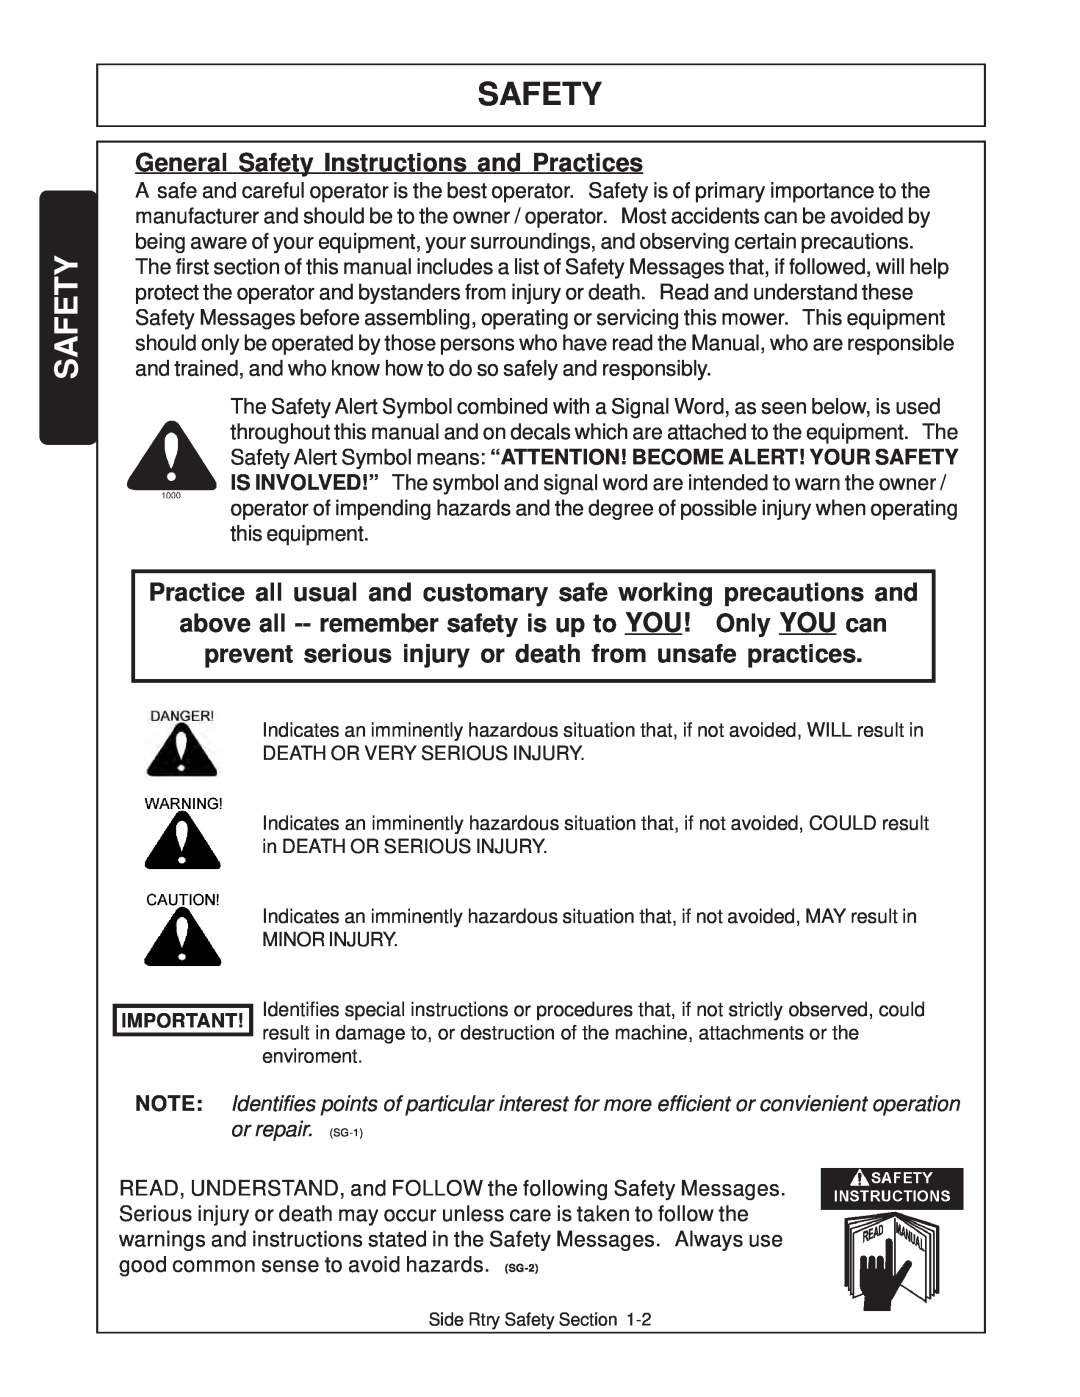 Tiger Products Co., Ltd TS 100A manual General Safety Instructions and Practices 